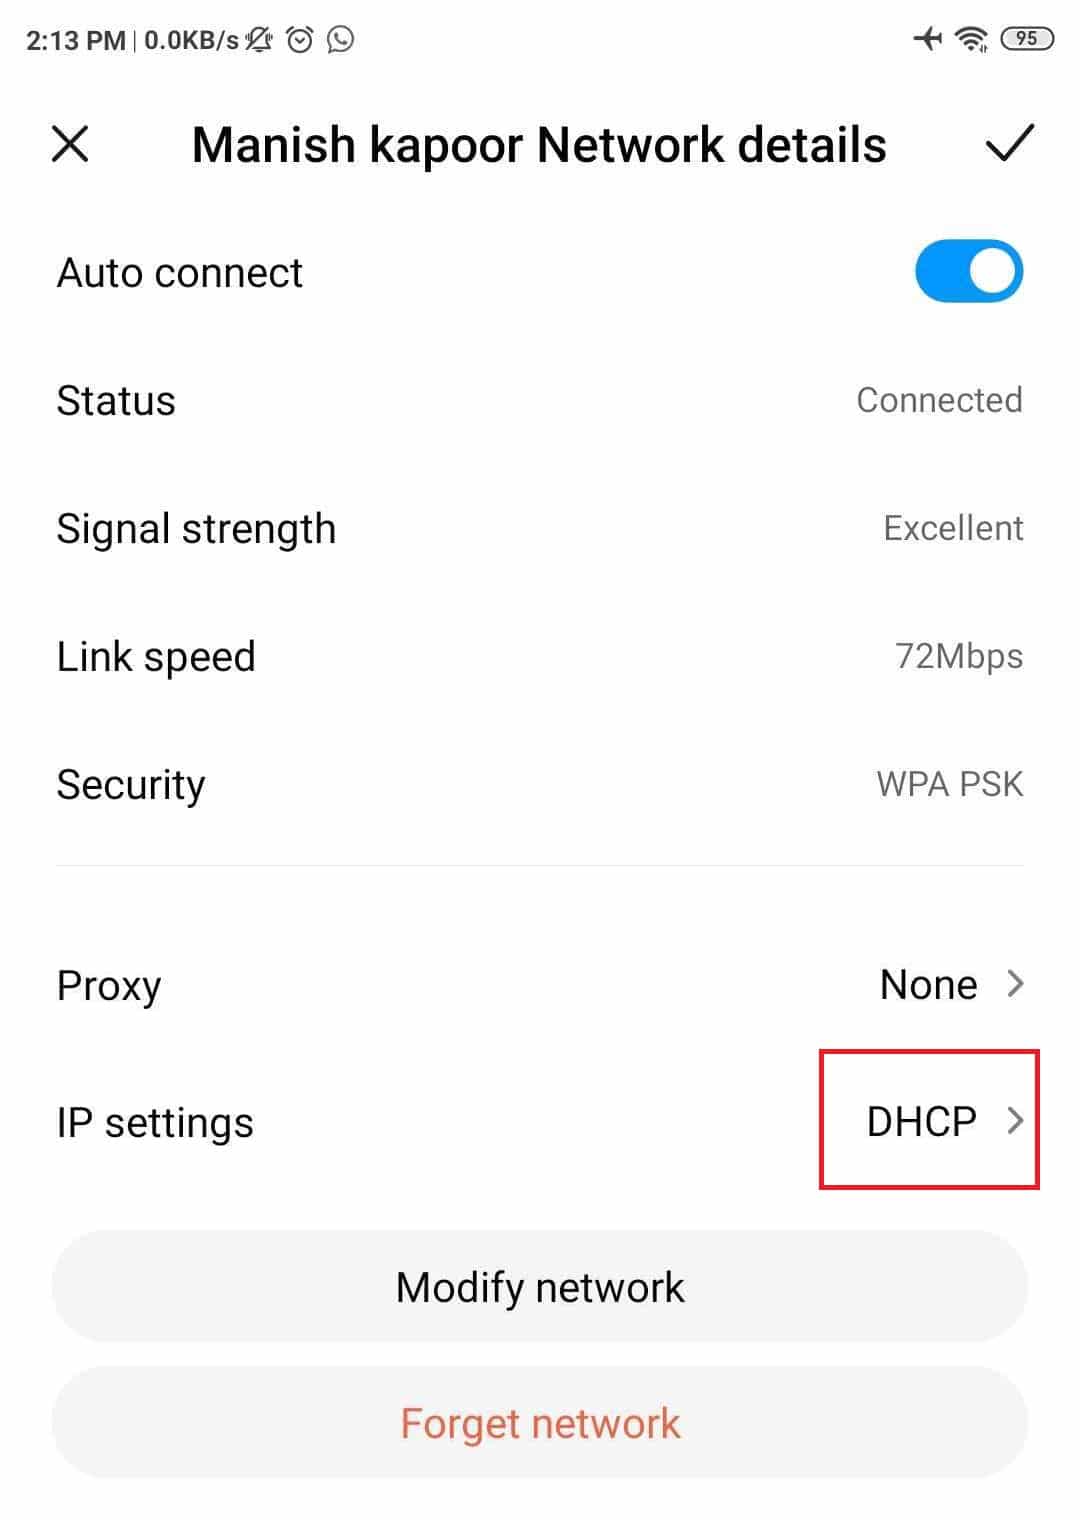 Change DHCP to Static.